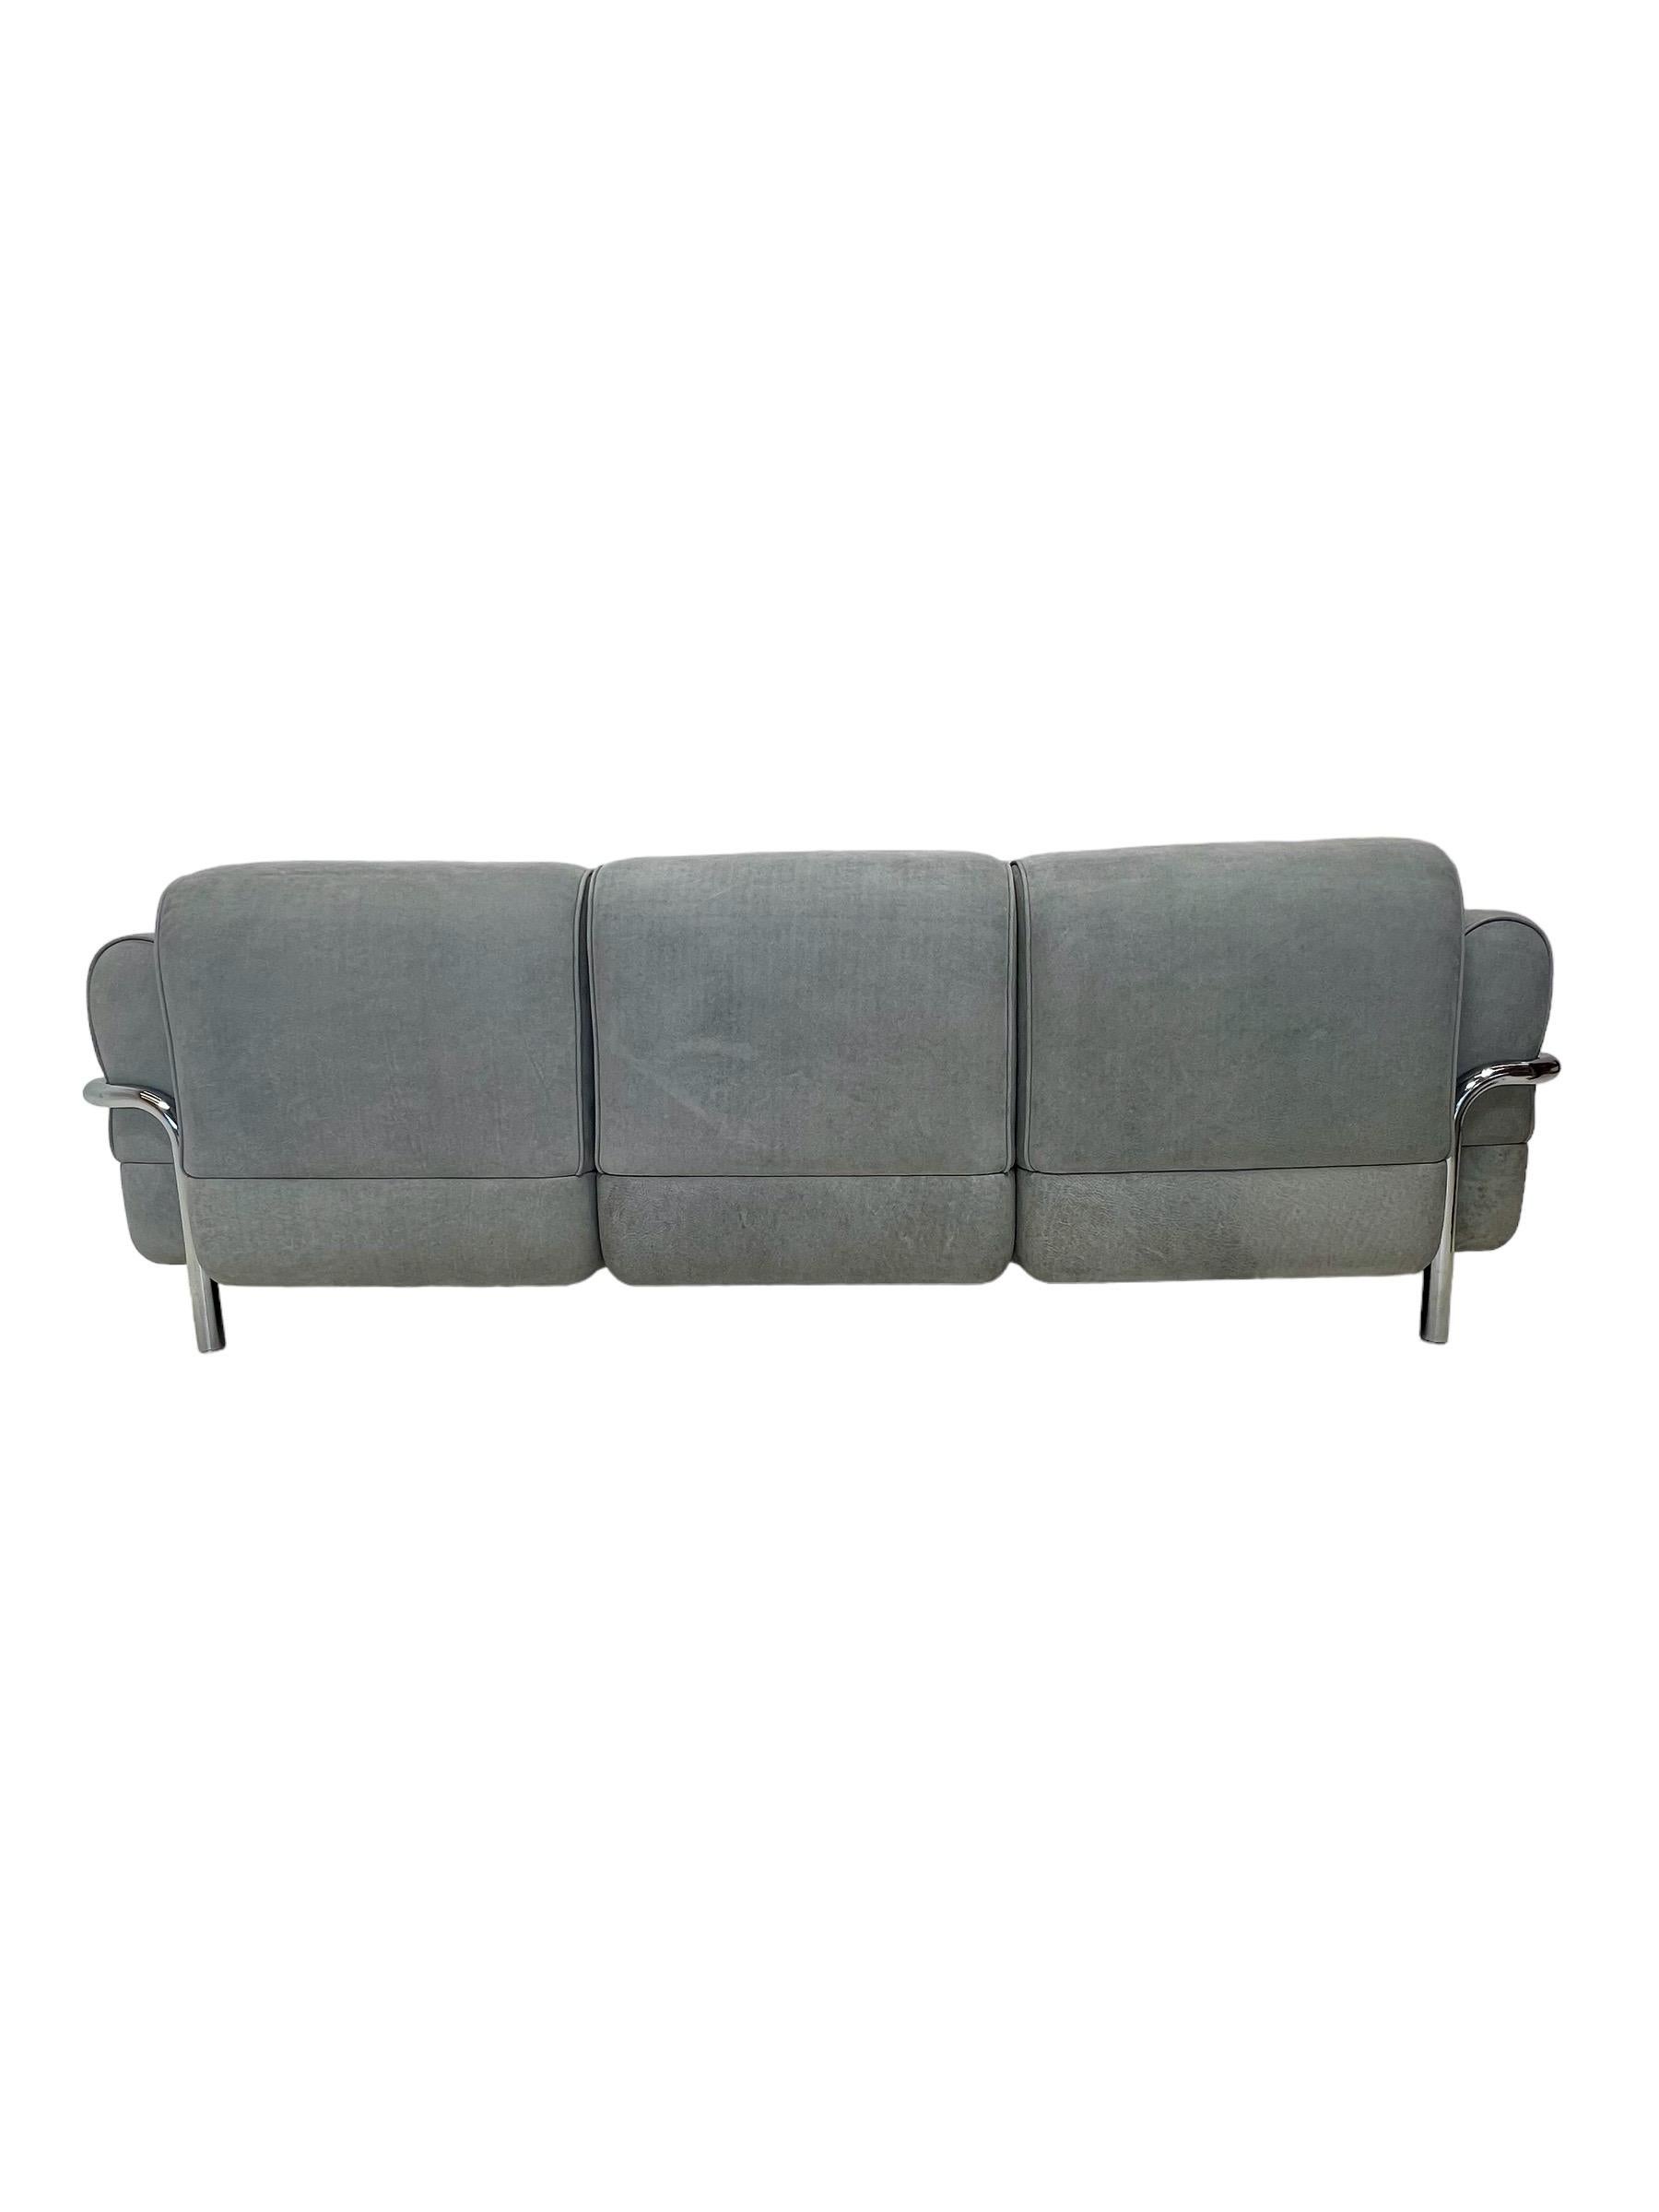 French LC2 Style Inspired Sofa in Distressed Suede Leather For Sale